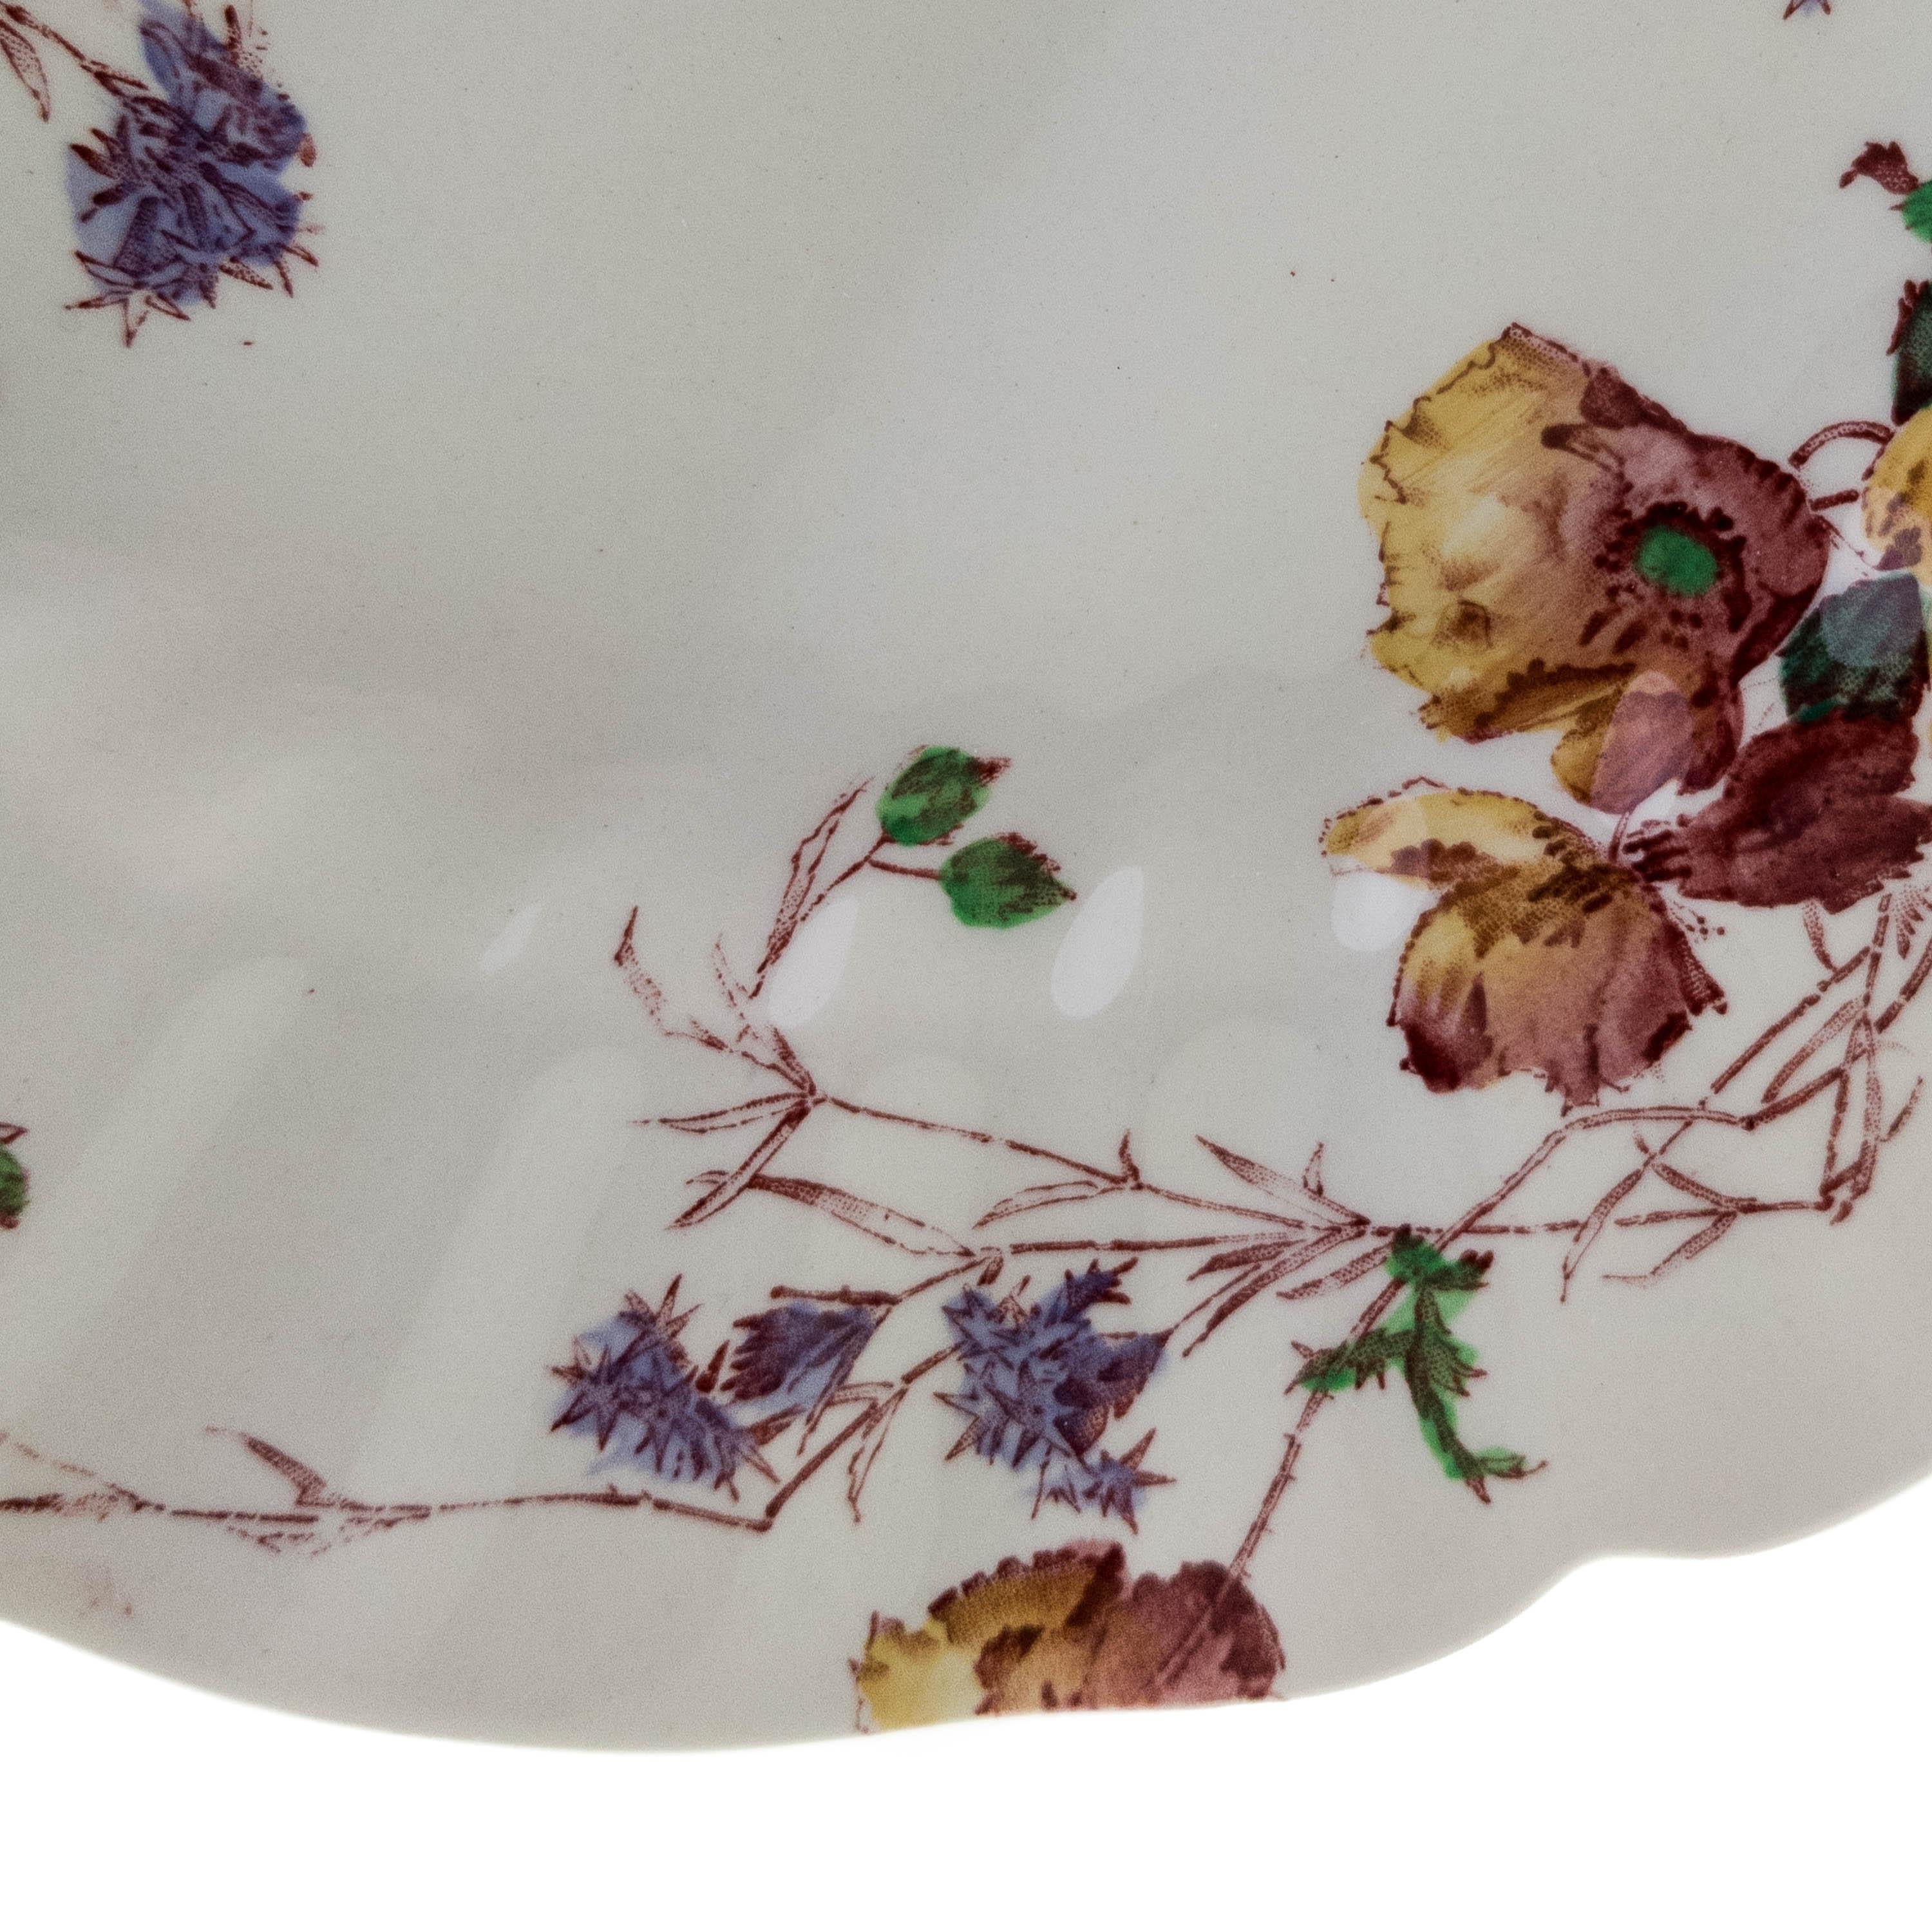 Royal Doulton's Classic shaped plate featuring a pretty floral decoration on its fine earthenware ground. In great antique condition.